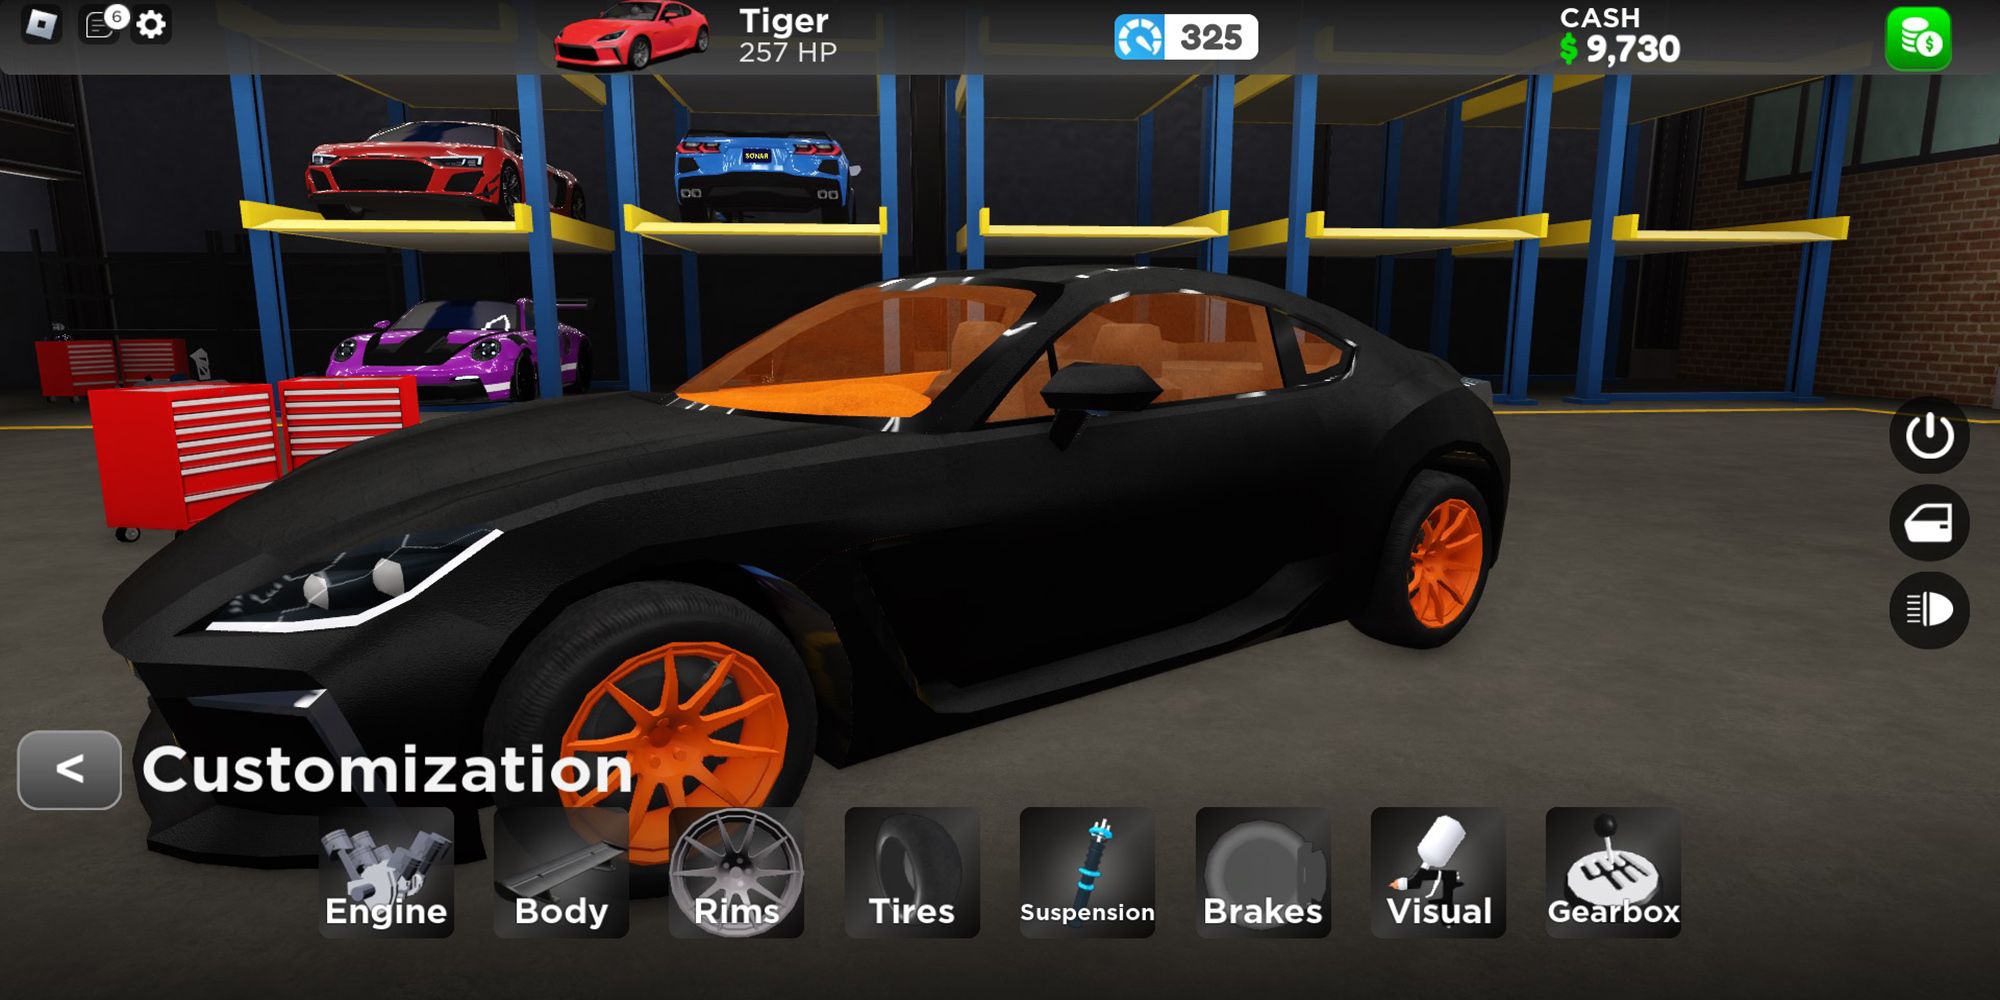 A sports car with TheGamer's iconic orange and black color scheme in the Roblox game, Drive World.